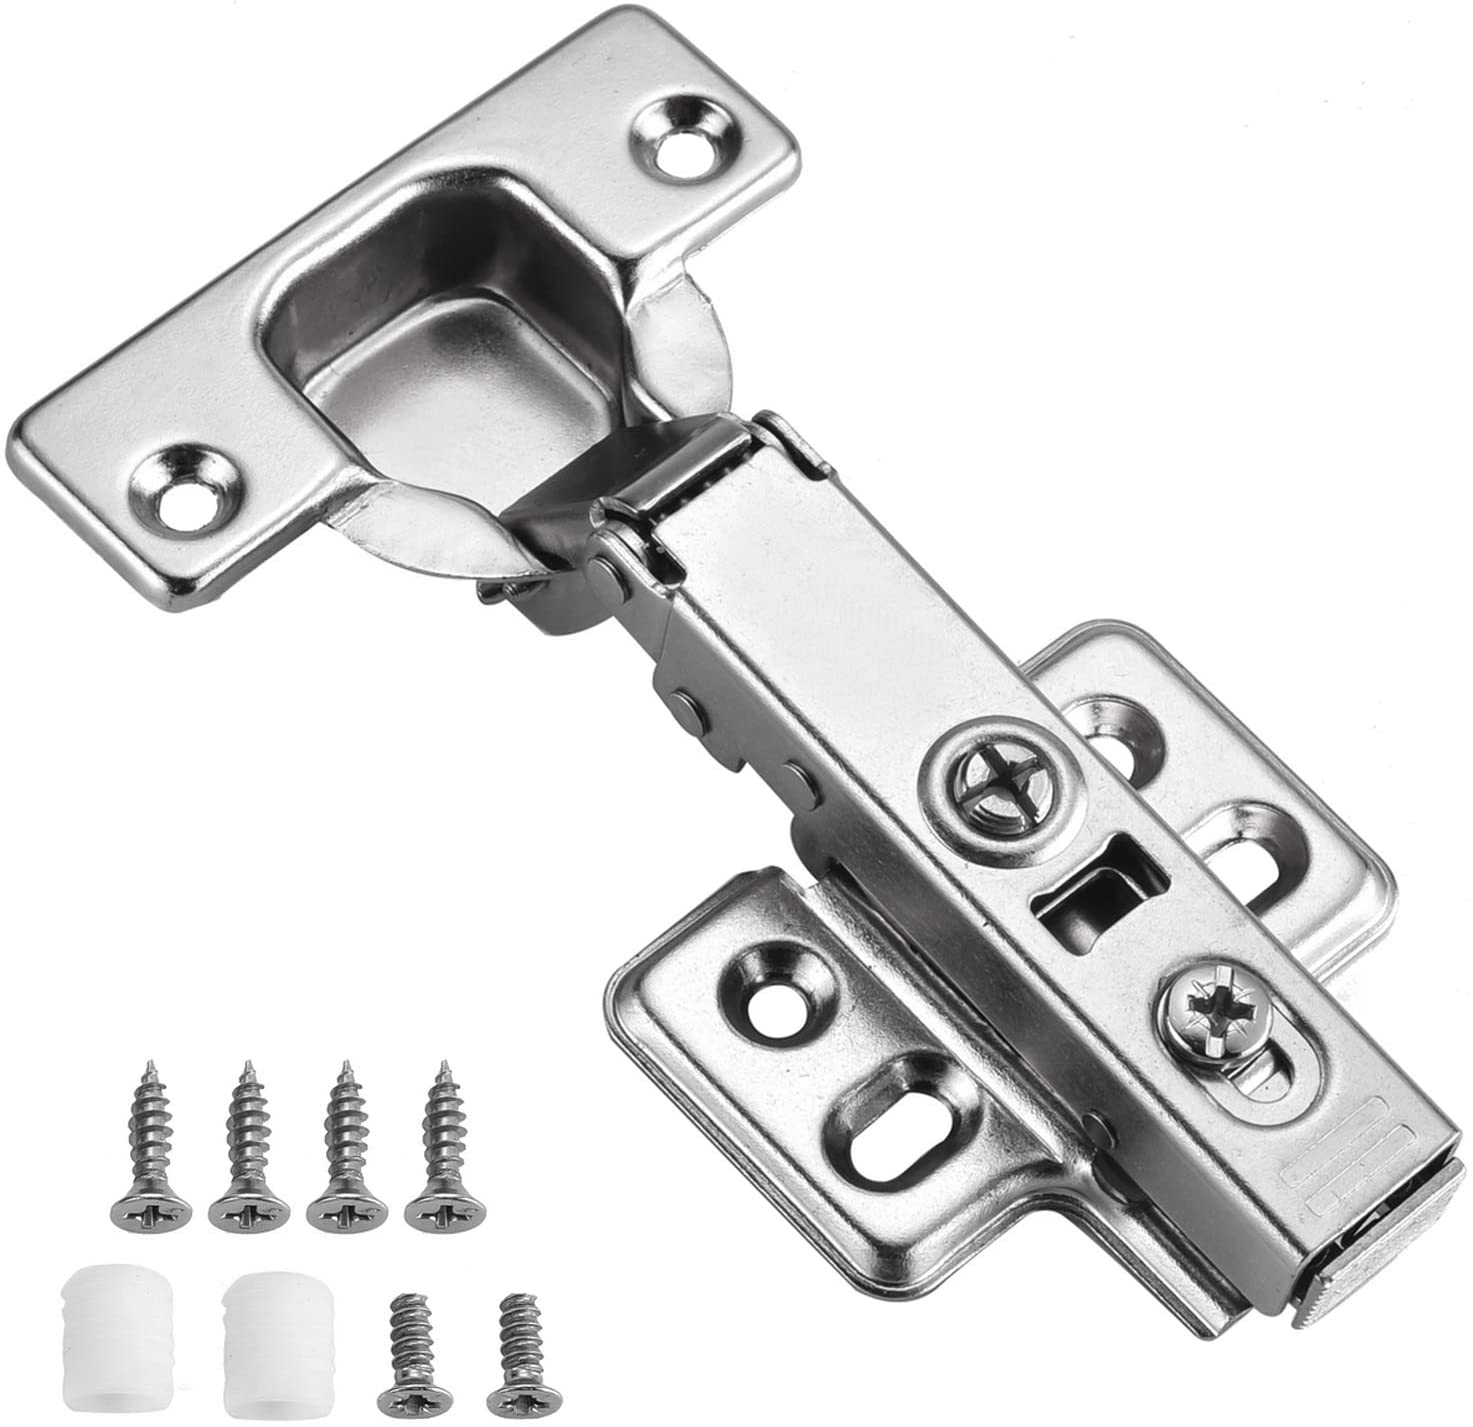 Luokim 4pcs Standard Cabinet Hinge,Fit for Frameless Cabinet,European Full Overlay,Soft Closing,Four-Hole mounting Plate Hinges,Nickel Plated Finish - image 1 of 7